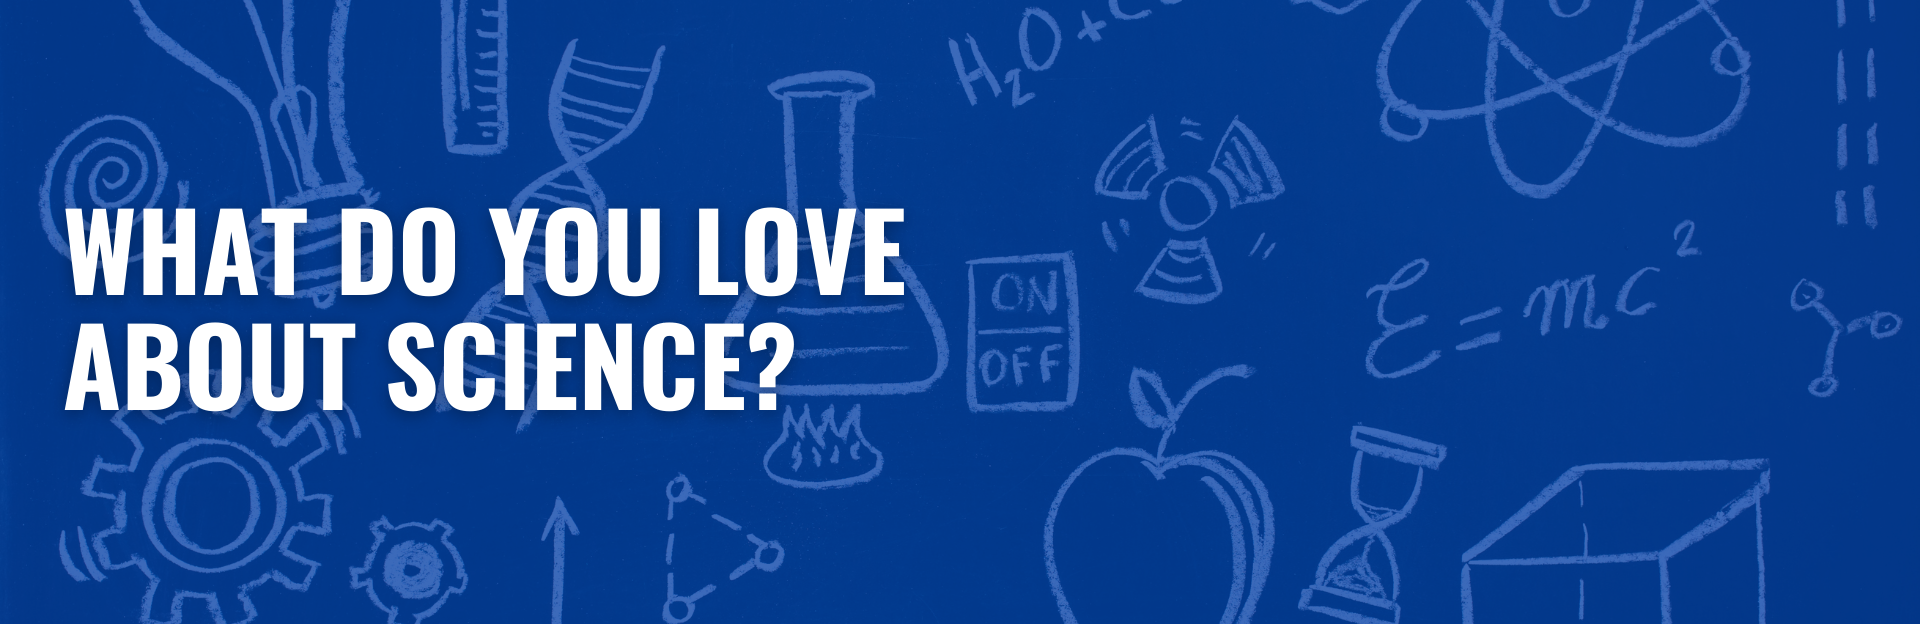 What Do You Love About Science?